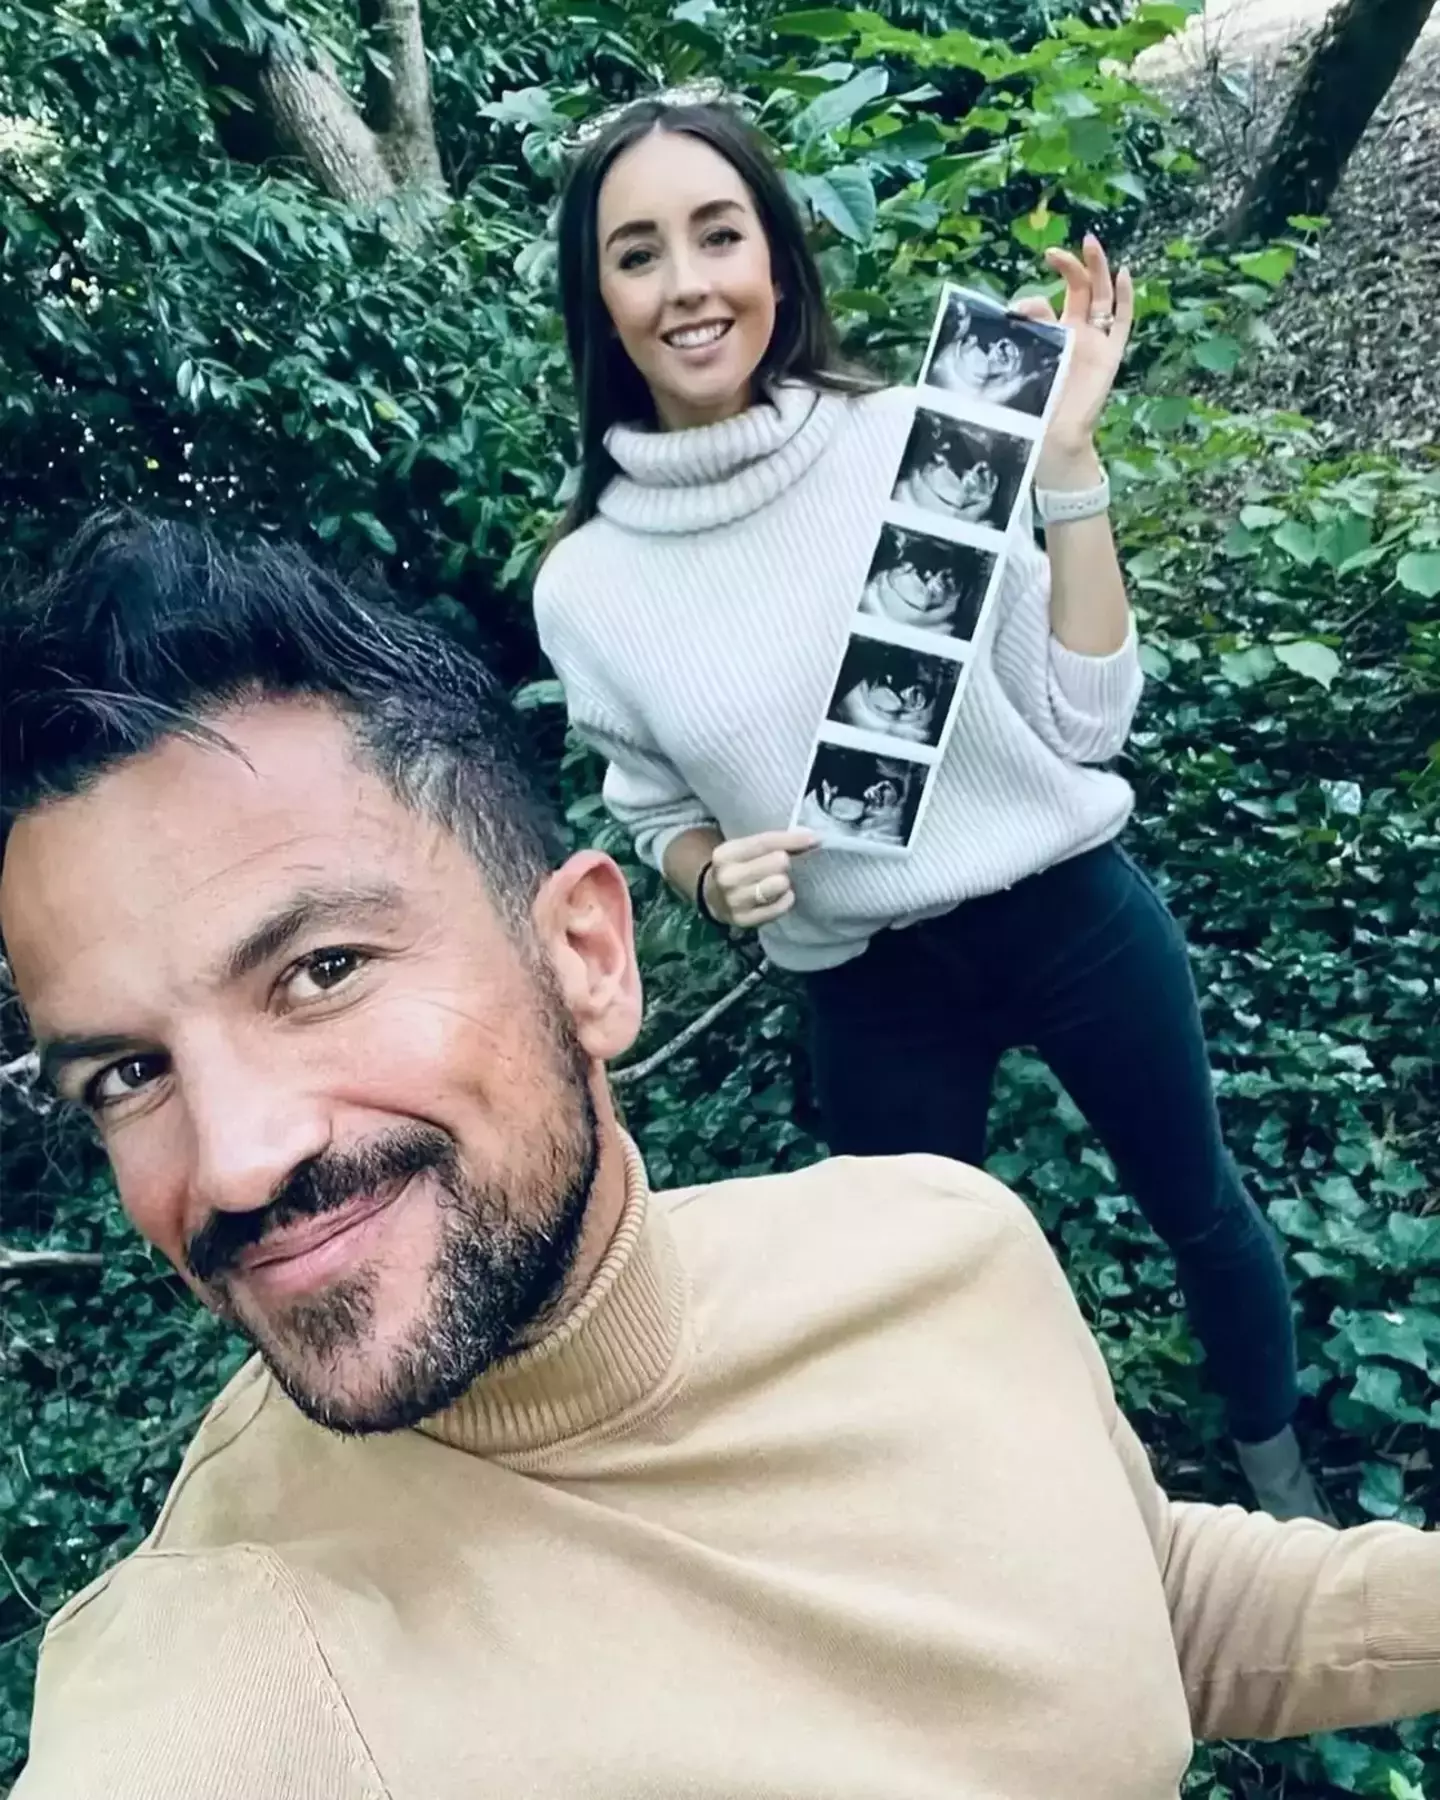 Peter Andre and wife Emily MacDonagh have been married since 2015.